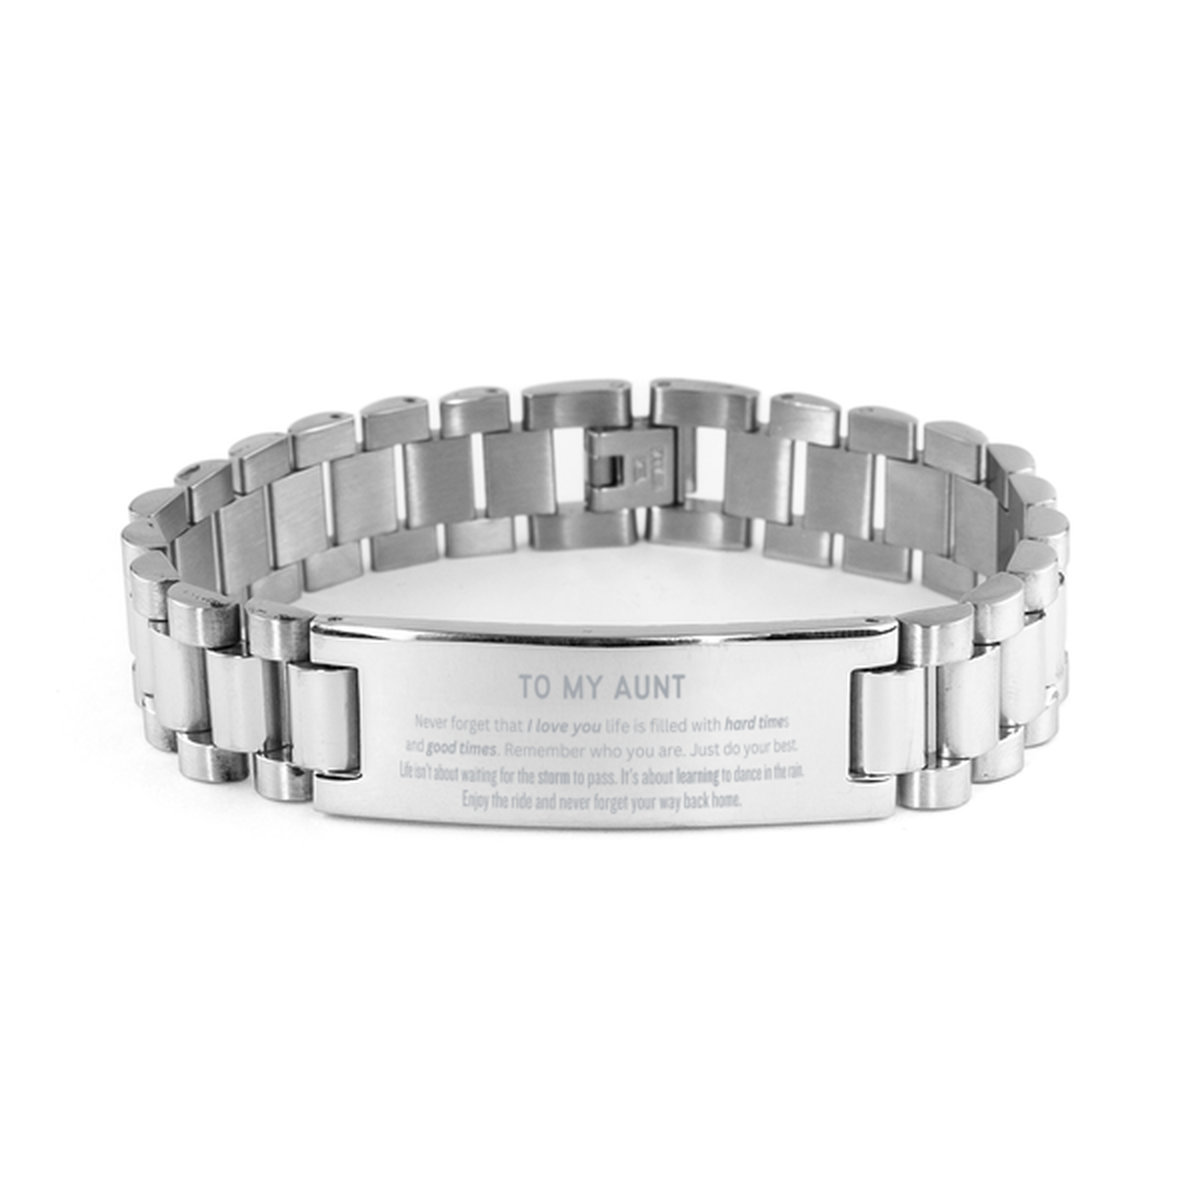 Christmas Aunt Ladder Stainless Steel Bracelet Gifts, To My Aunt Birthday Thank You Gifts For Aunt, Graduation Unique Gifts For Aunt To My Aunt Never forget that I love you life is filled with hard times and good times. Remember who you are. Just do your